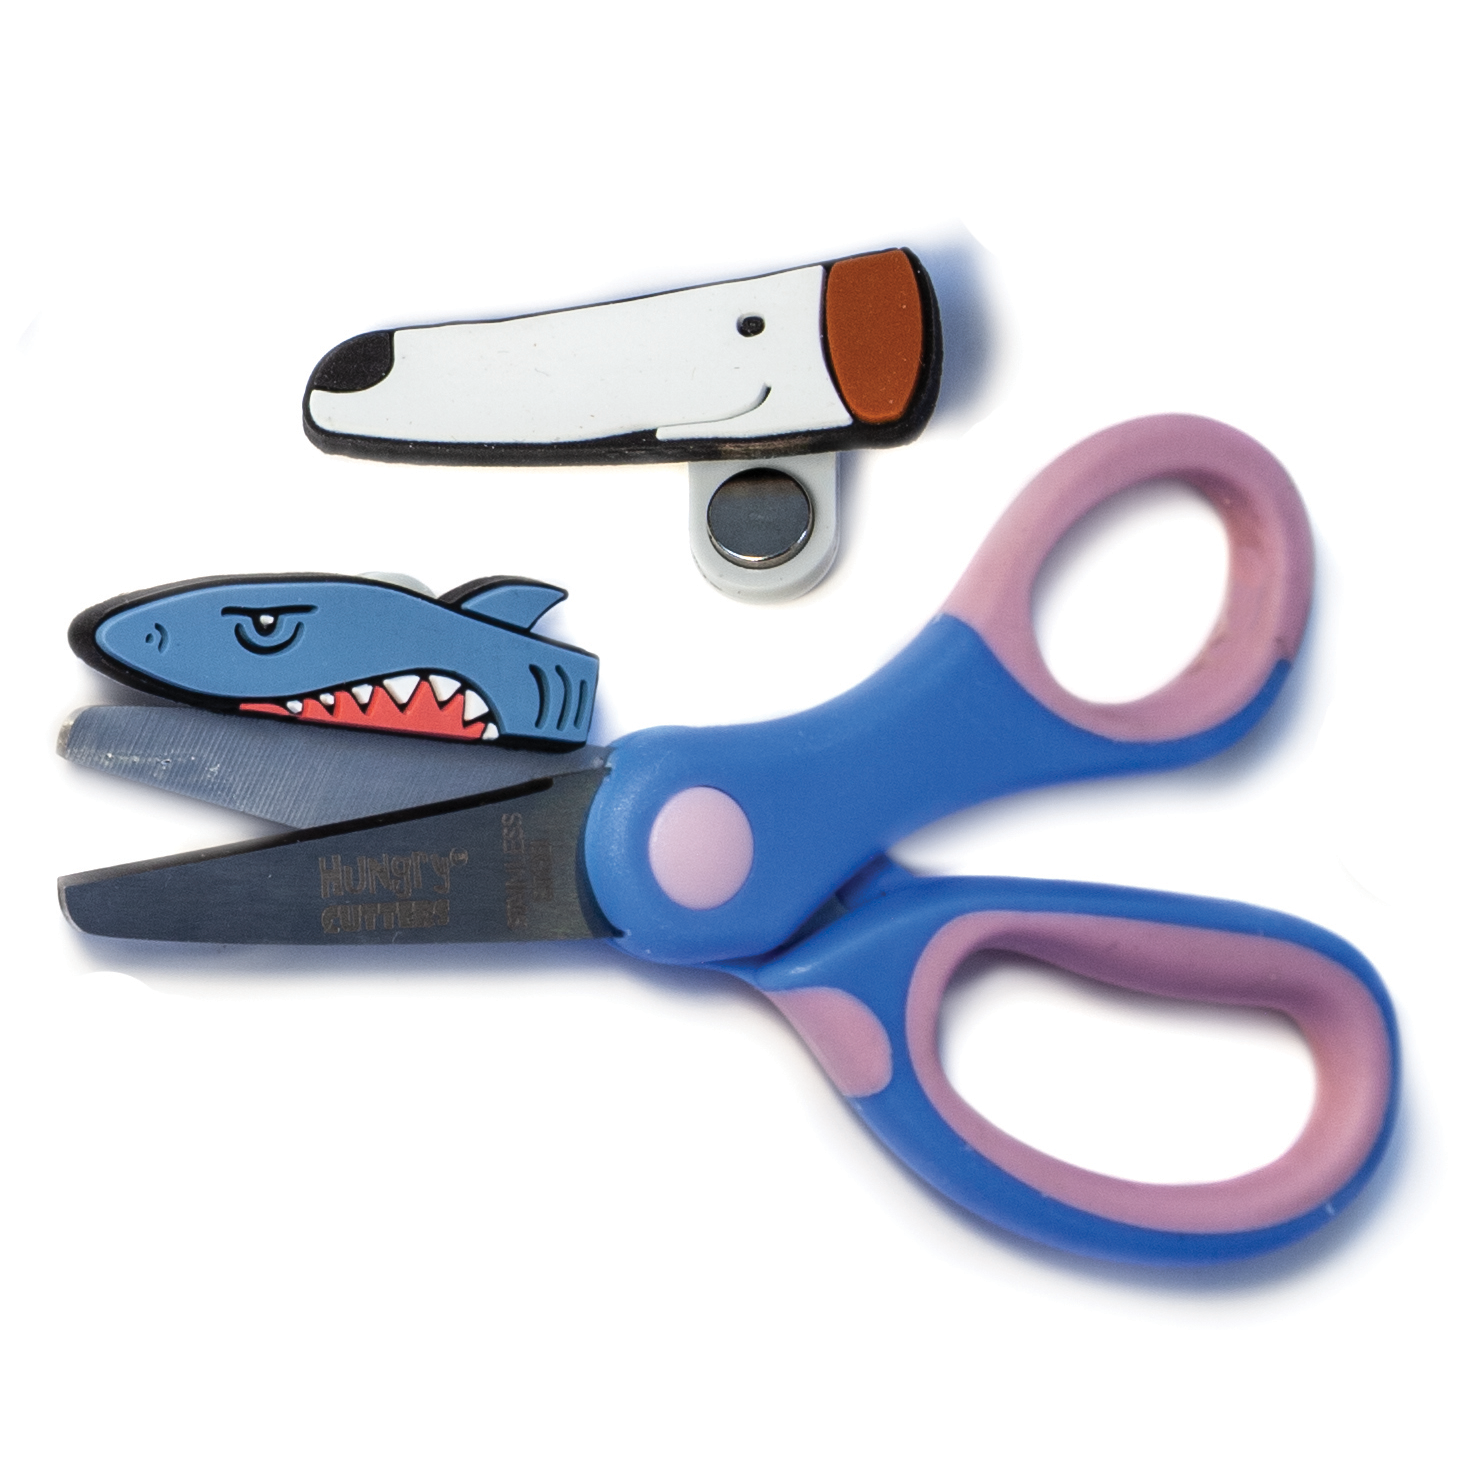 https://www.therapyshoppe.com/components/com_redshop/assets/images/product/1681476494_hungry-cutter-sets.png